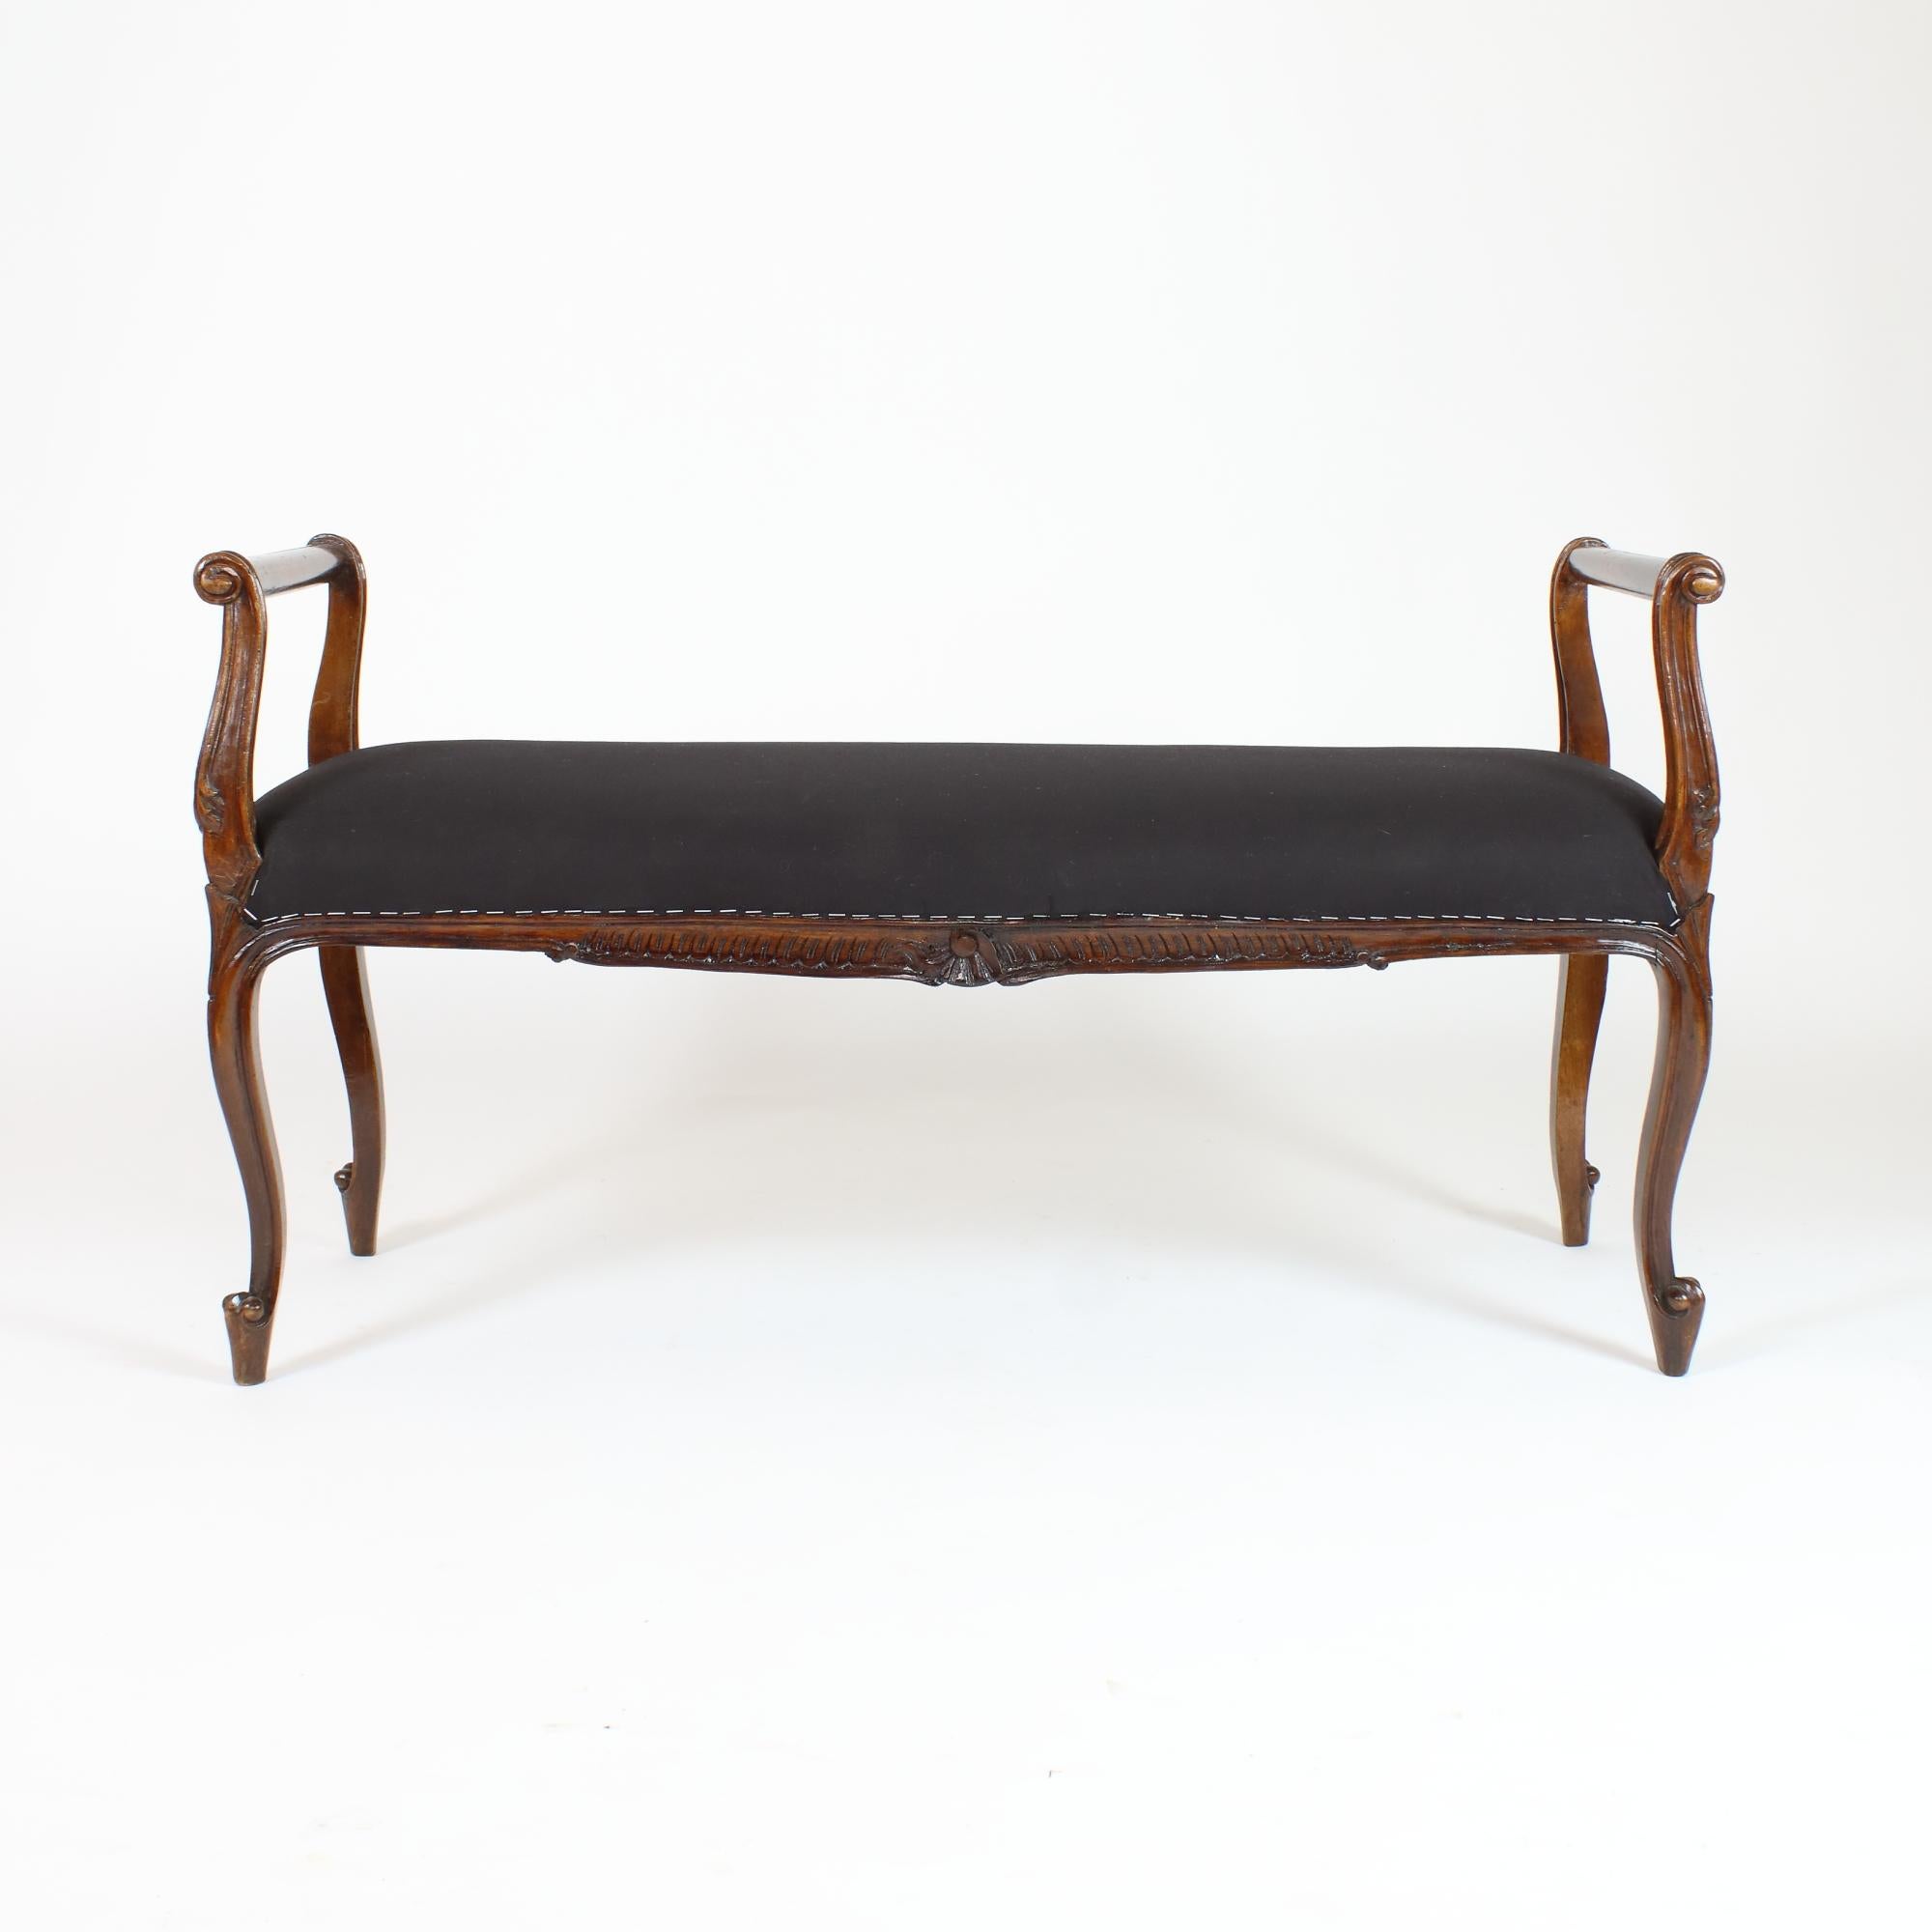 French 19th Century Louis XV Large Walnut Stool or Bedroom Bench In Good Condition For Sale In Berlin, DE